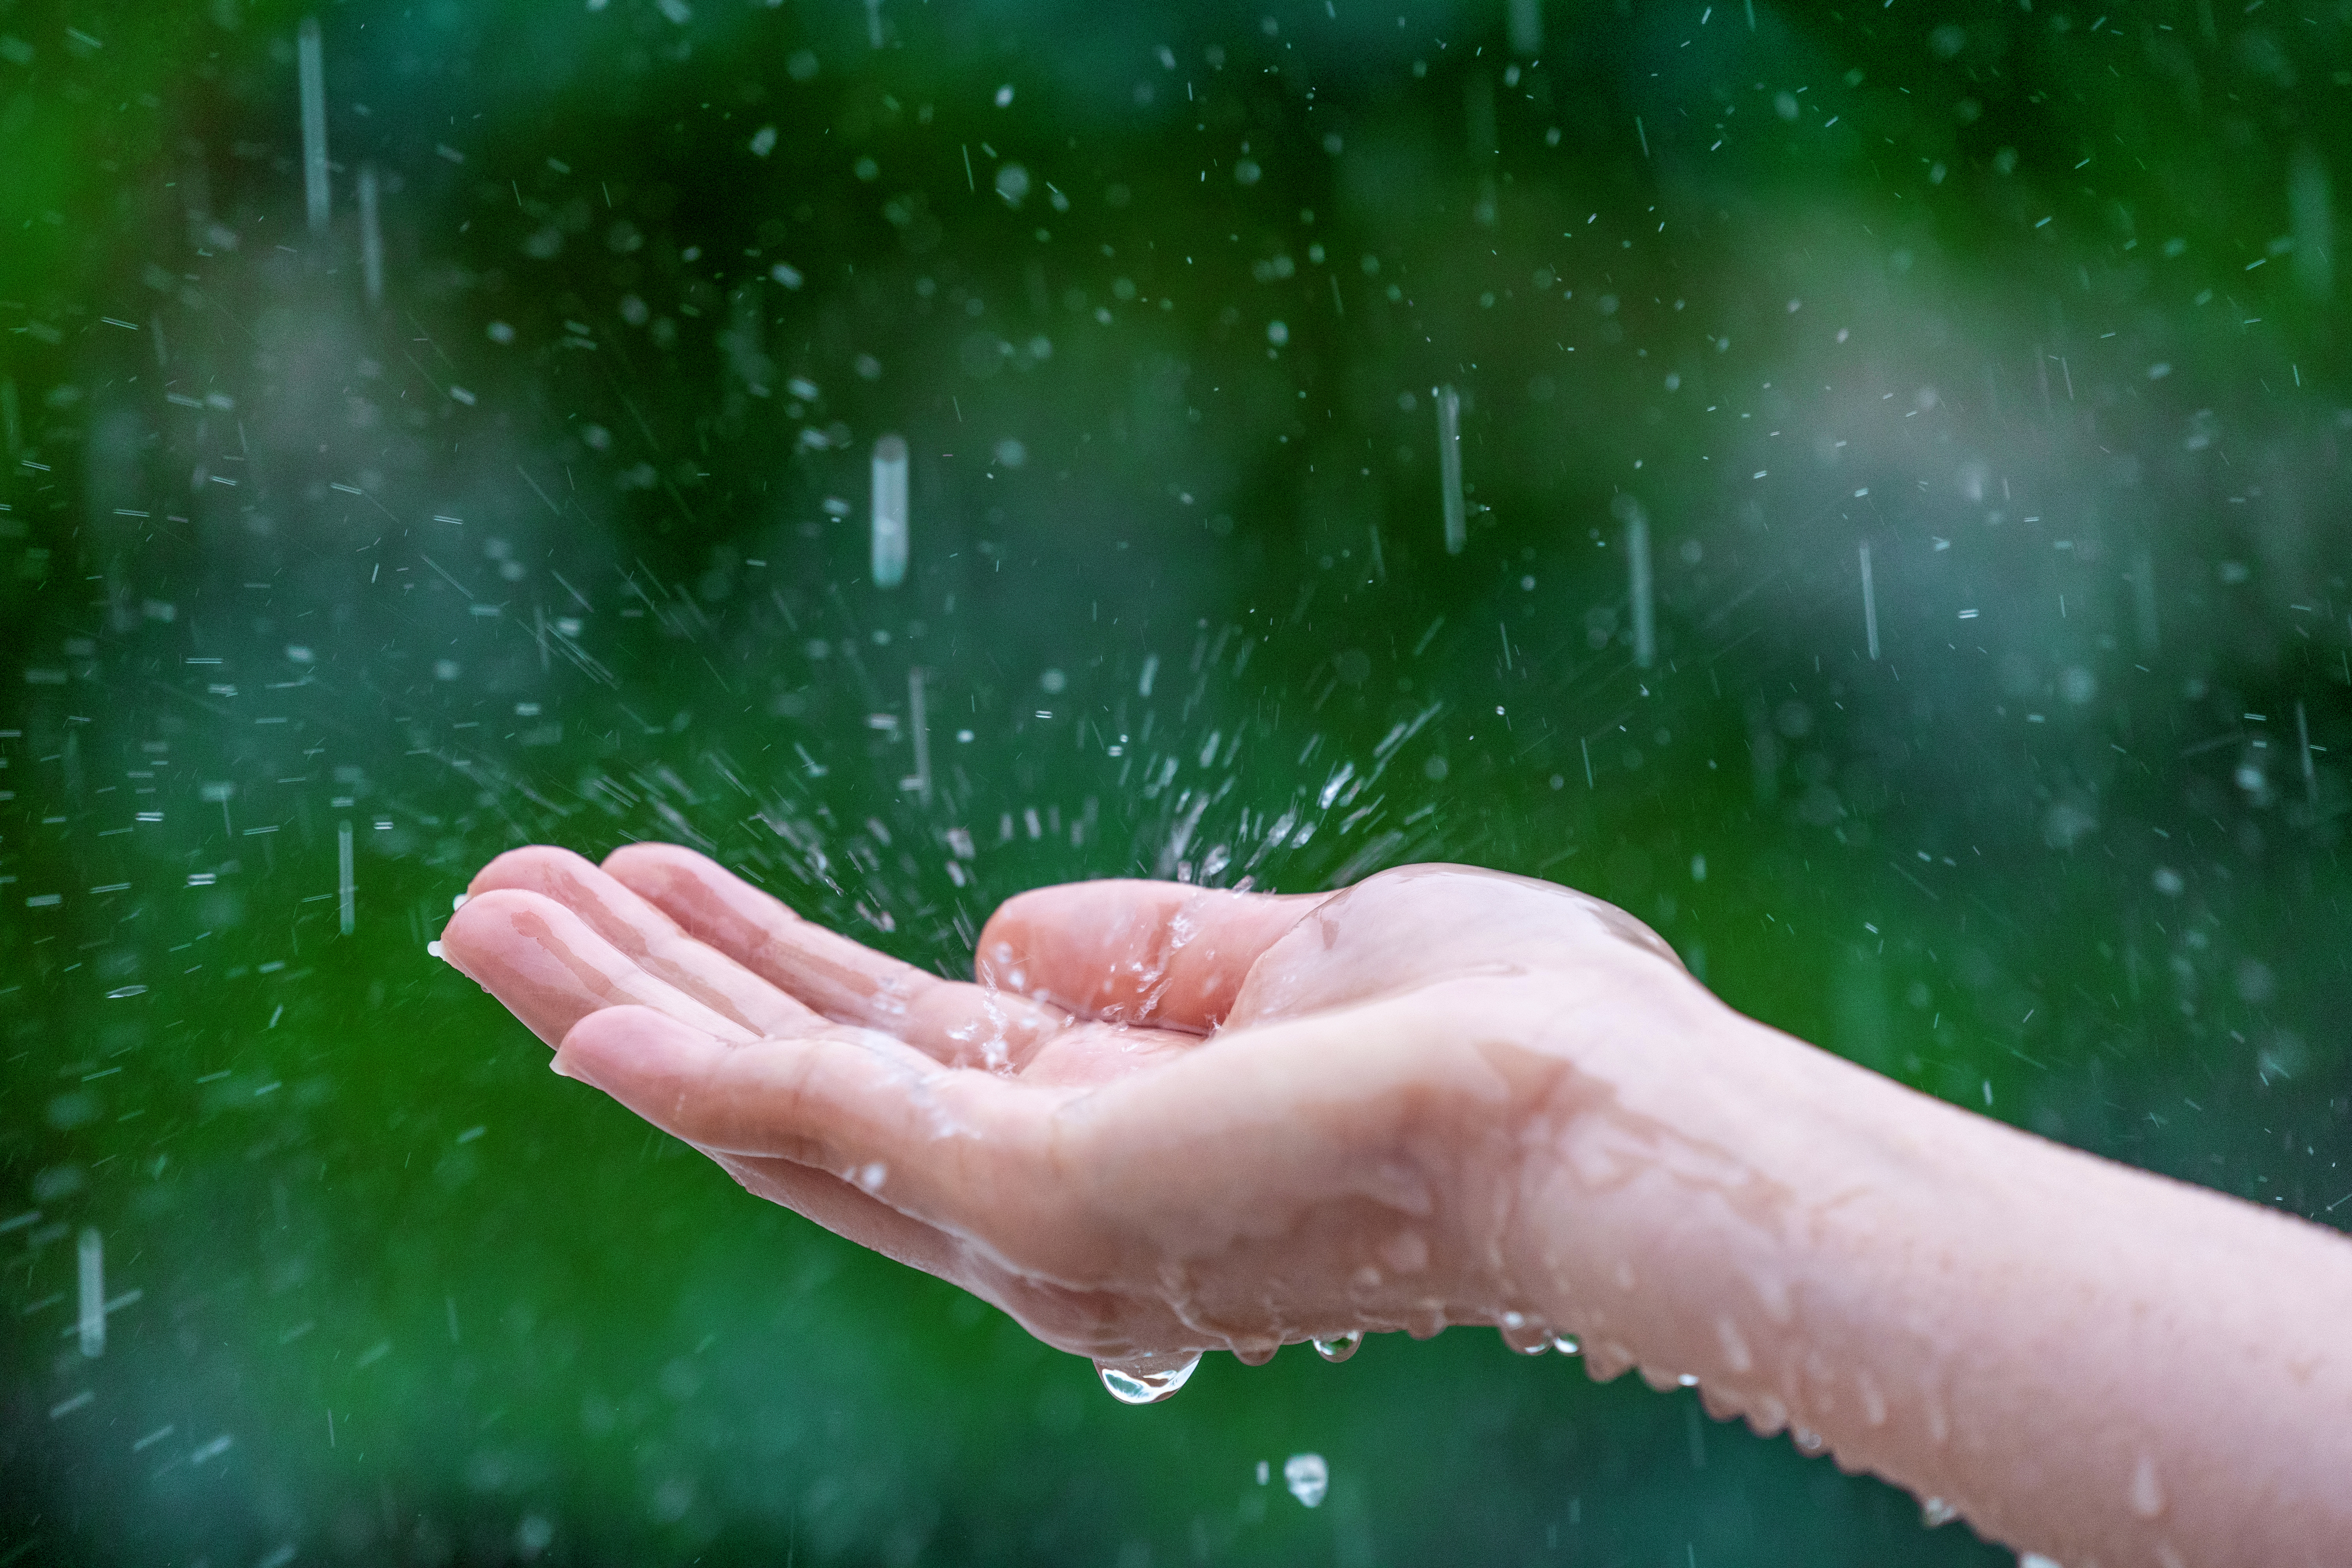 Raindrops being caught in an open hand